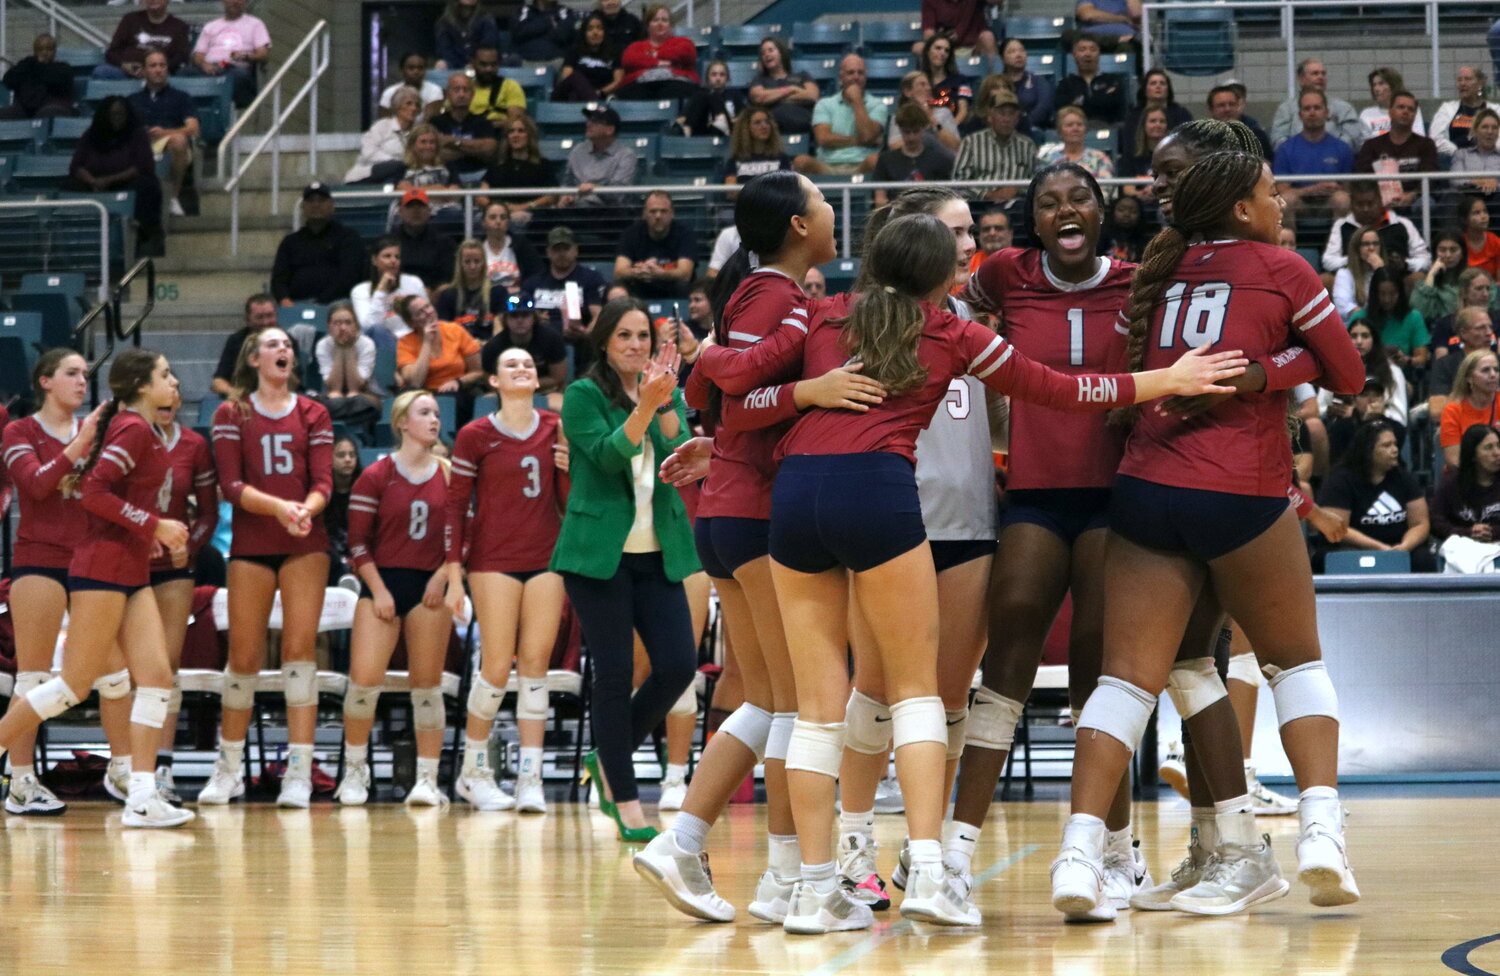 Tompkins players celebrate after winning a set during Tuesday’s match between Seven Lakes and Tompkins at the Merrell Center.